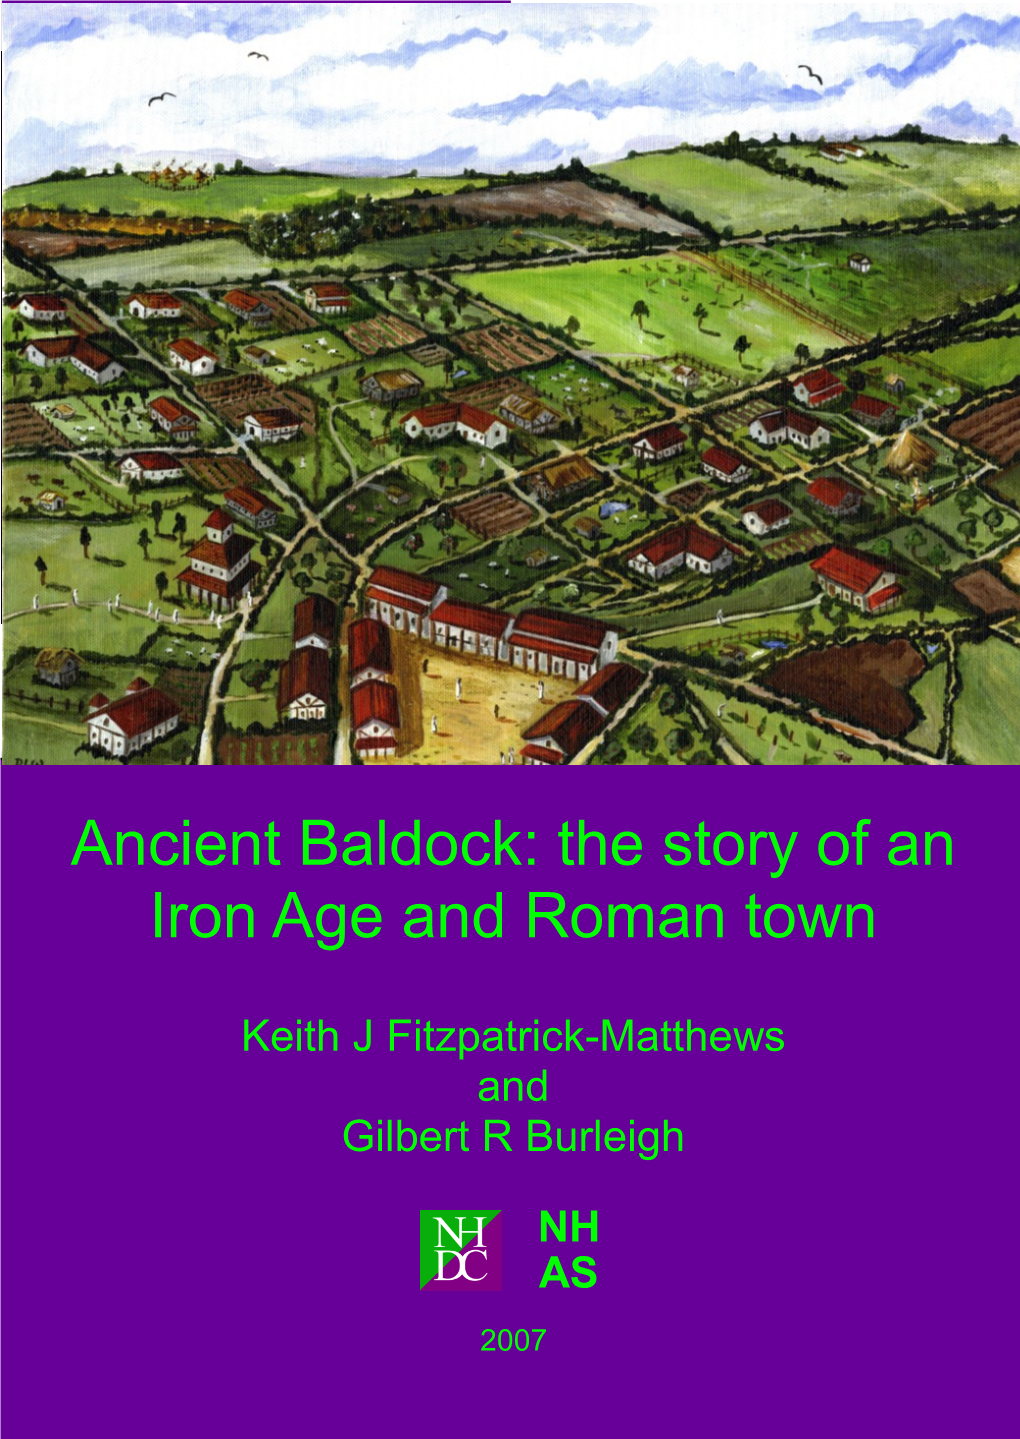 Ancient Baldock: the Story of an Iron Age and Roman Town